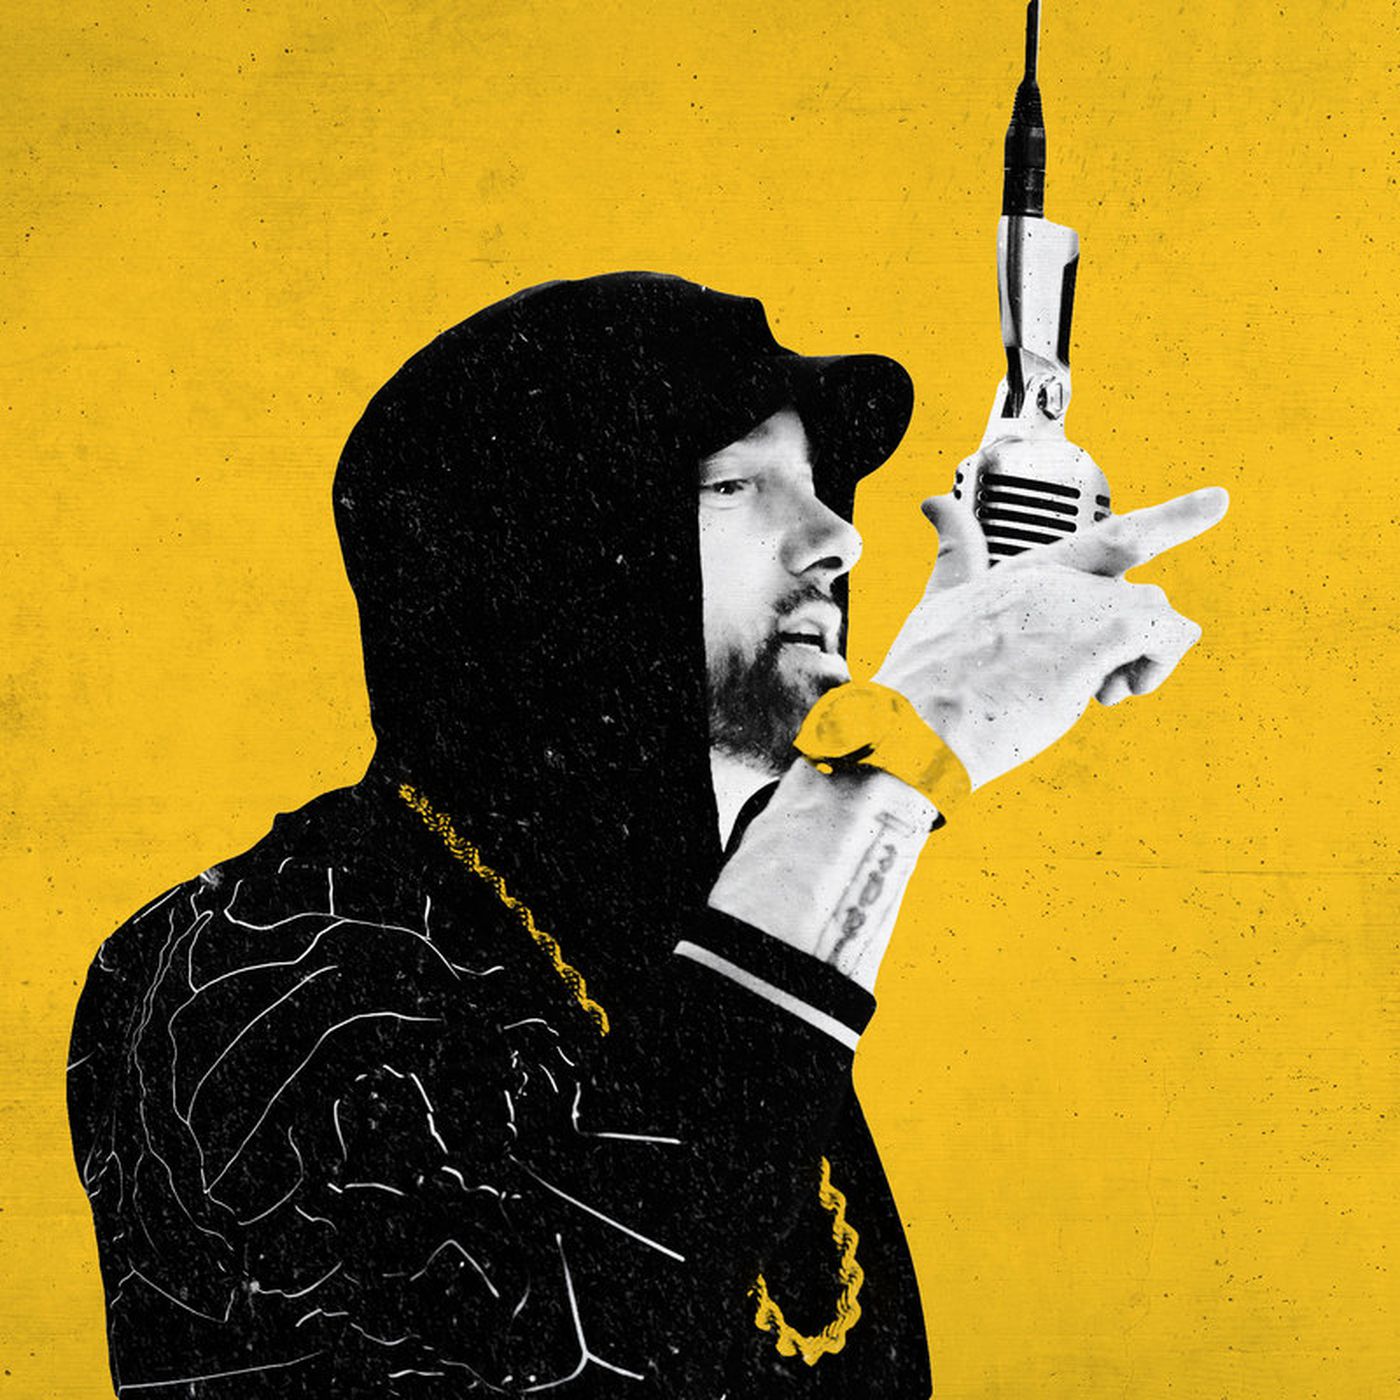 Eminem S Music To Be Murdered By Review What Did We Expect The Ringer Wish i could i could have said goodbye i would have said what i wanted to maybe even cried for you. eminem s music to be murdered by